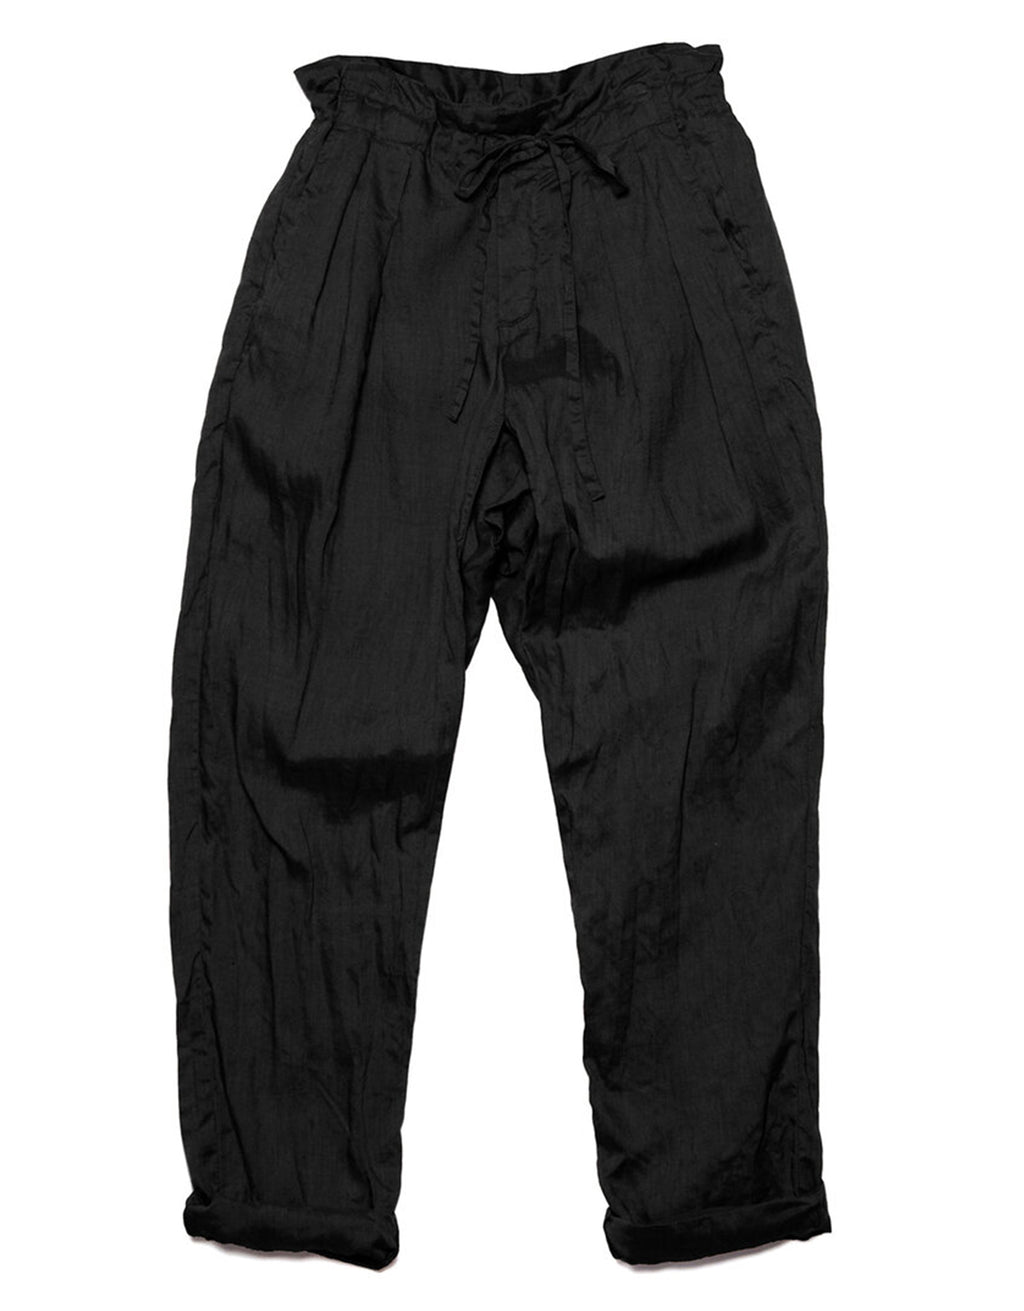 Monitaly Drop Crotch Linen pant in Black. Available at FAWN Toronto.